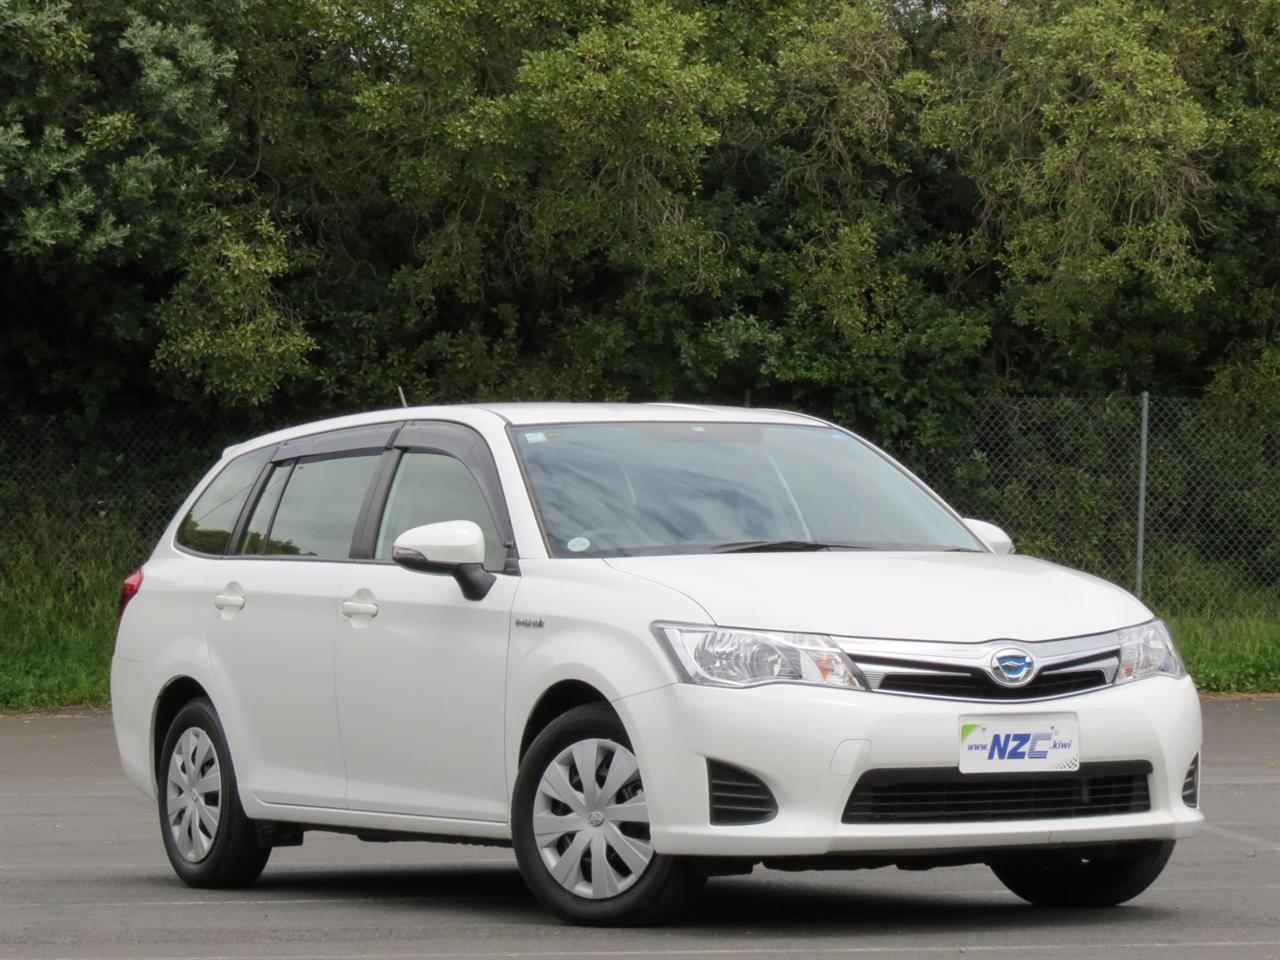 NZC 2014 Toyota Corolla just arrived to Auckland